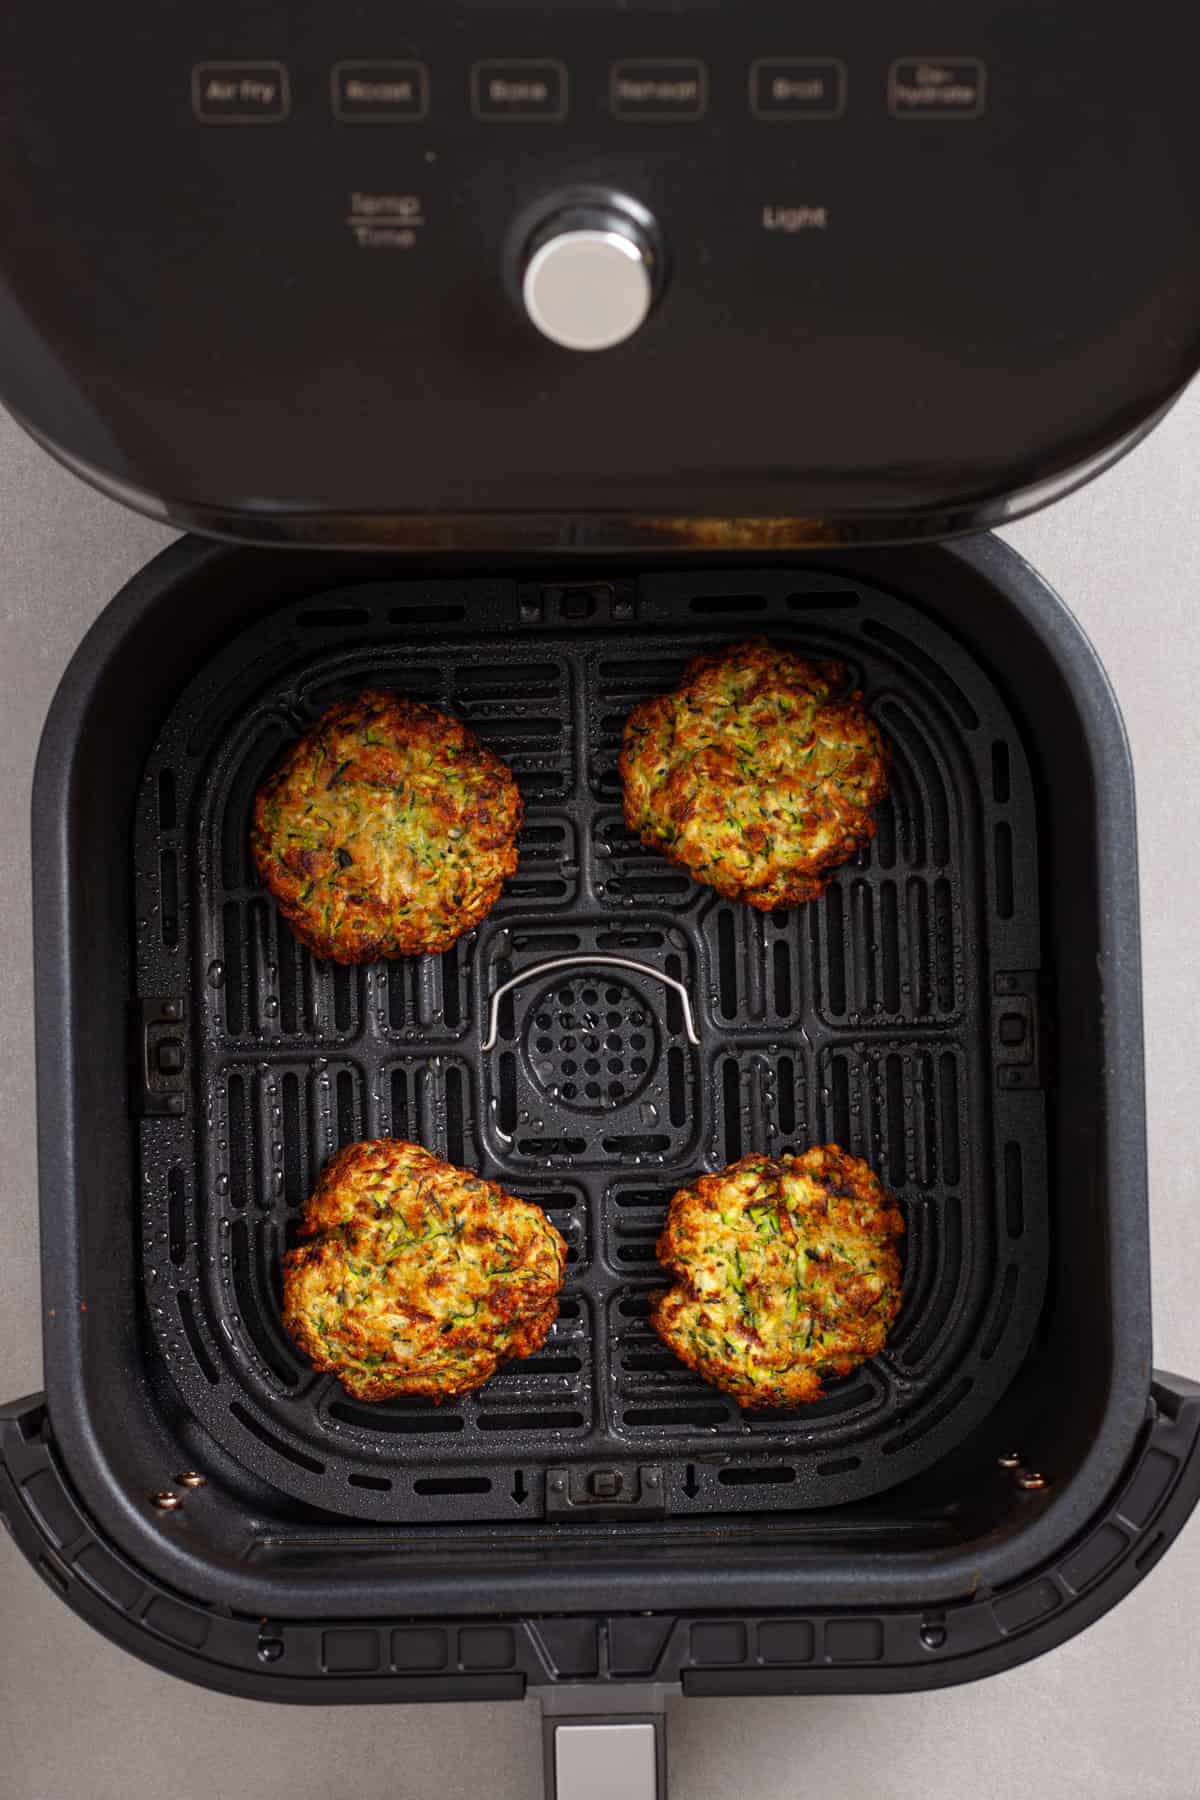 Golden brown air fried zucchini fritters in a basket of an air fryer.